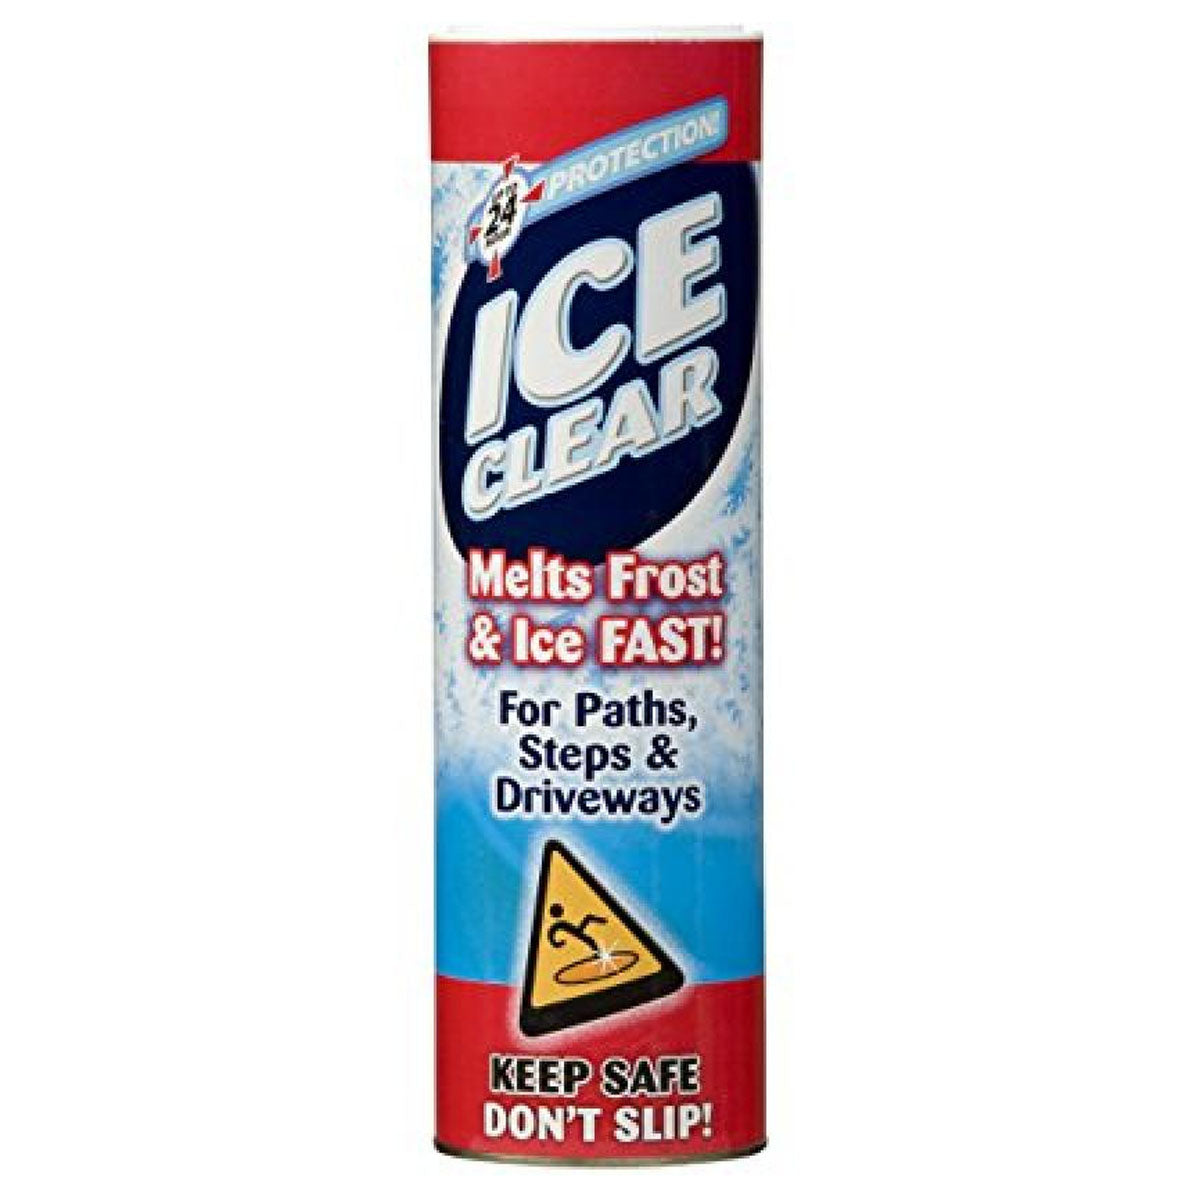 A can of Ice Clear - Floor Cleaner - 750g on a white background.